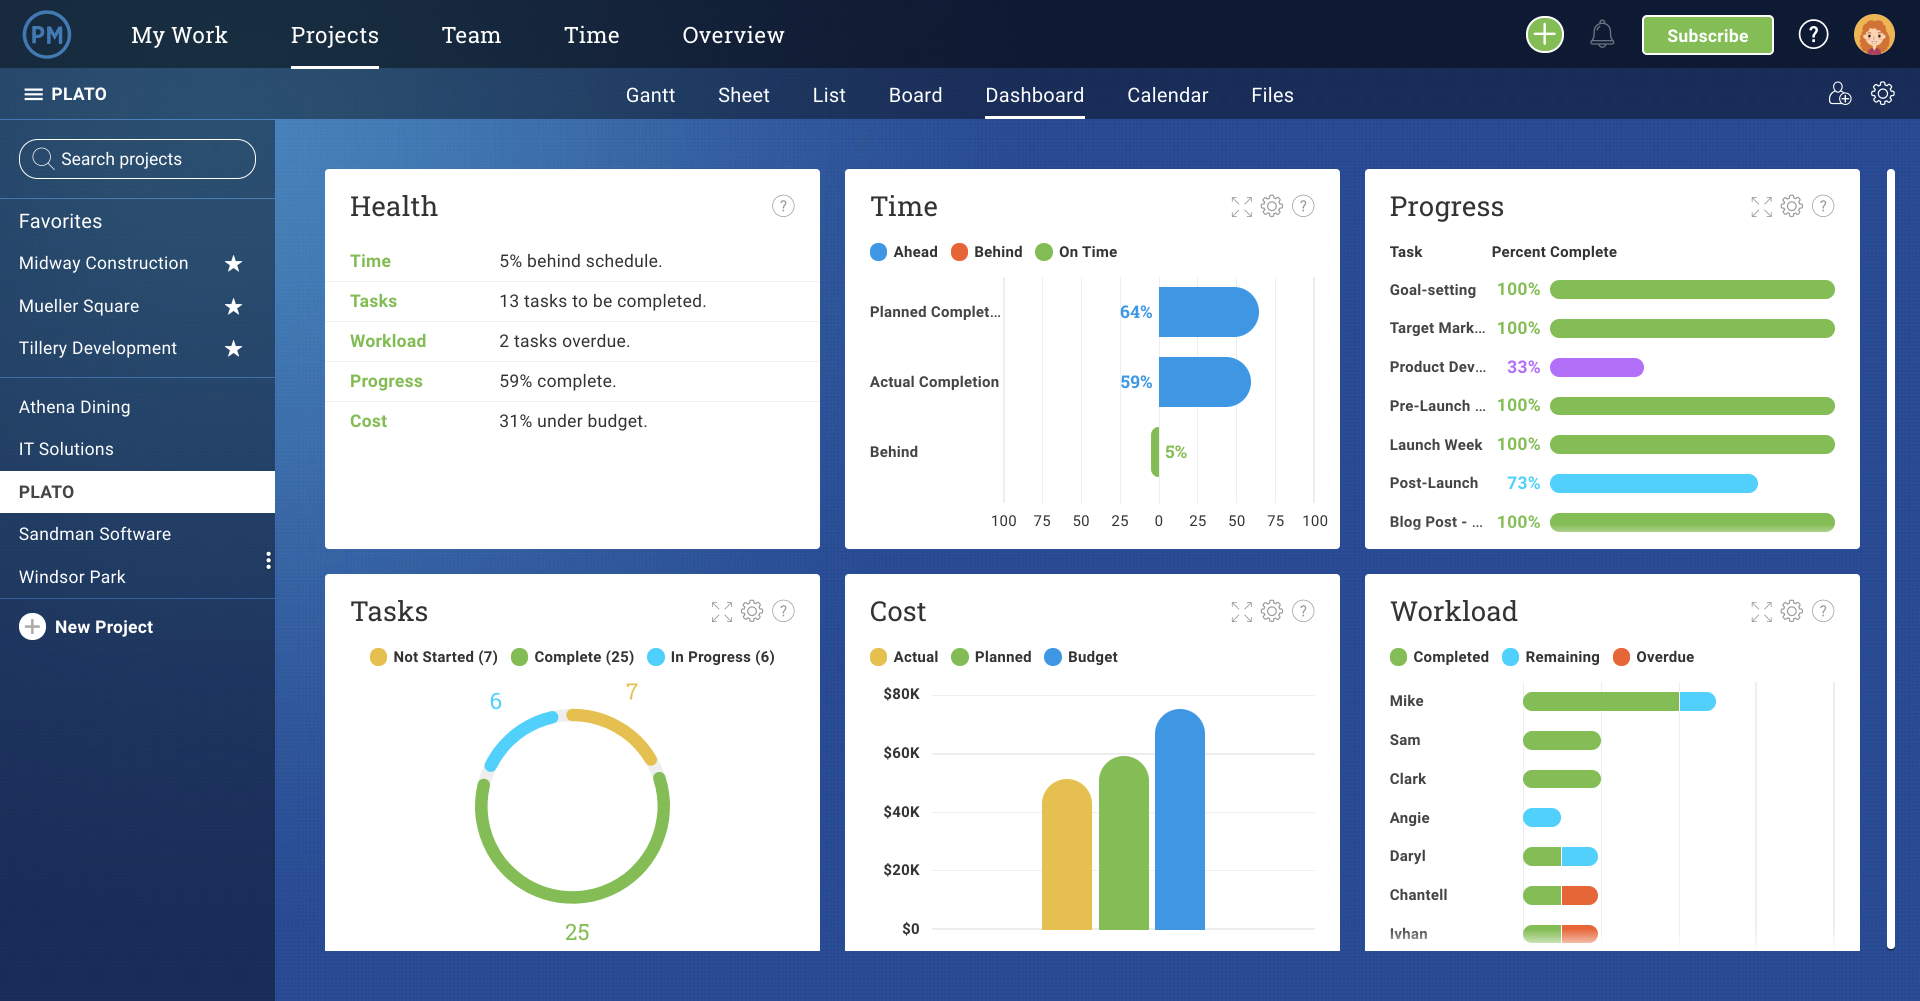 A screenshot of ProjectManager.com's dashboard, which shows a Project's health in terms of 6 key metrics - health, task, workload, time, cost and progress